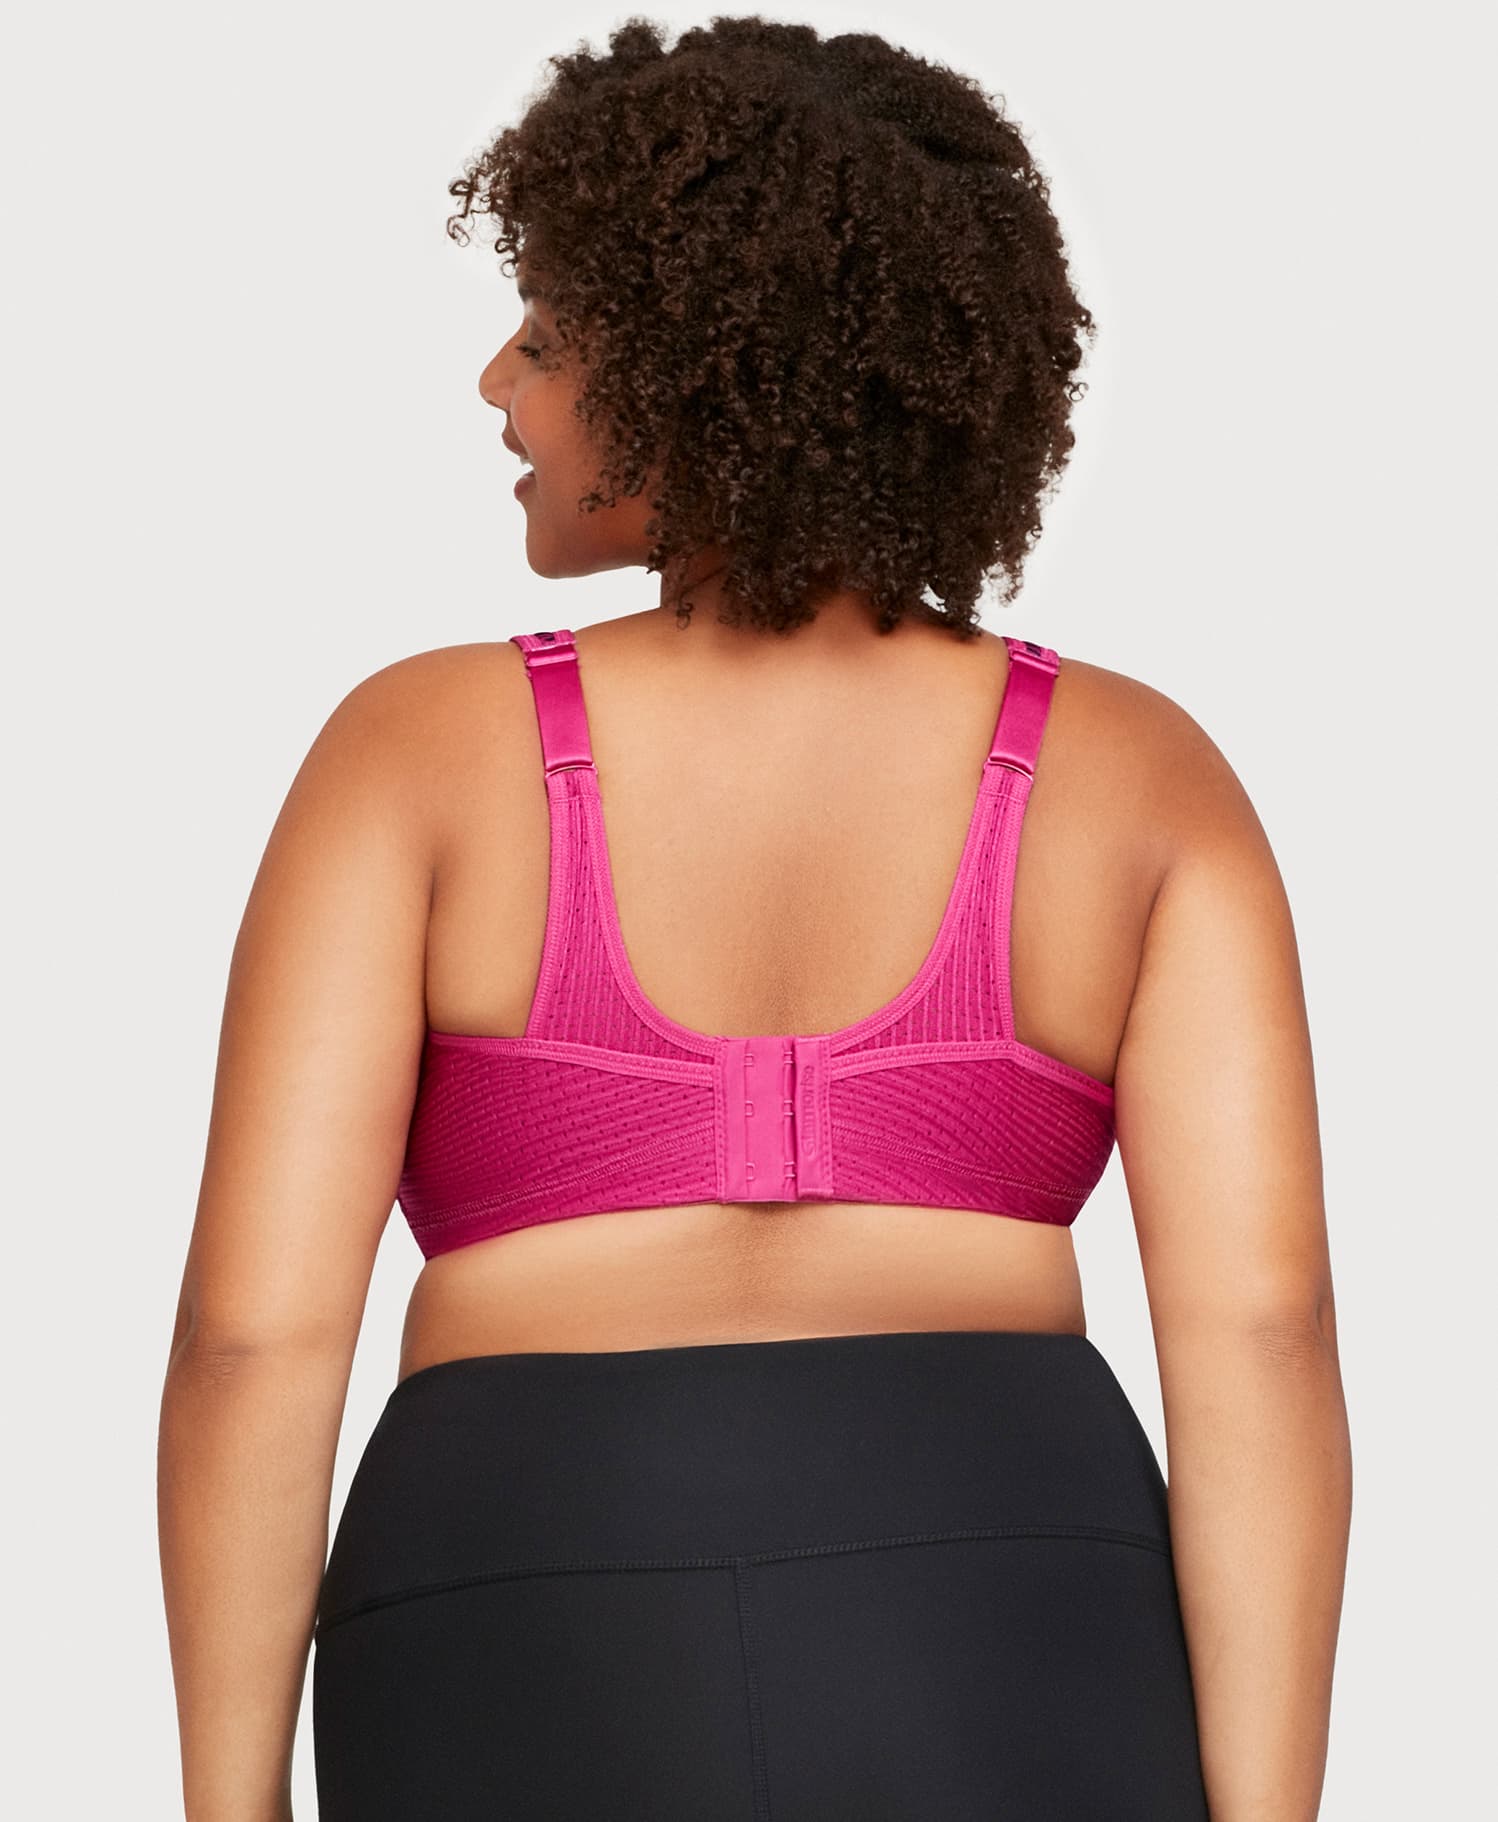 Buy Medium Impact Padded Sports Bra with Racerback Design in Coral